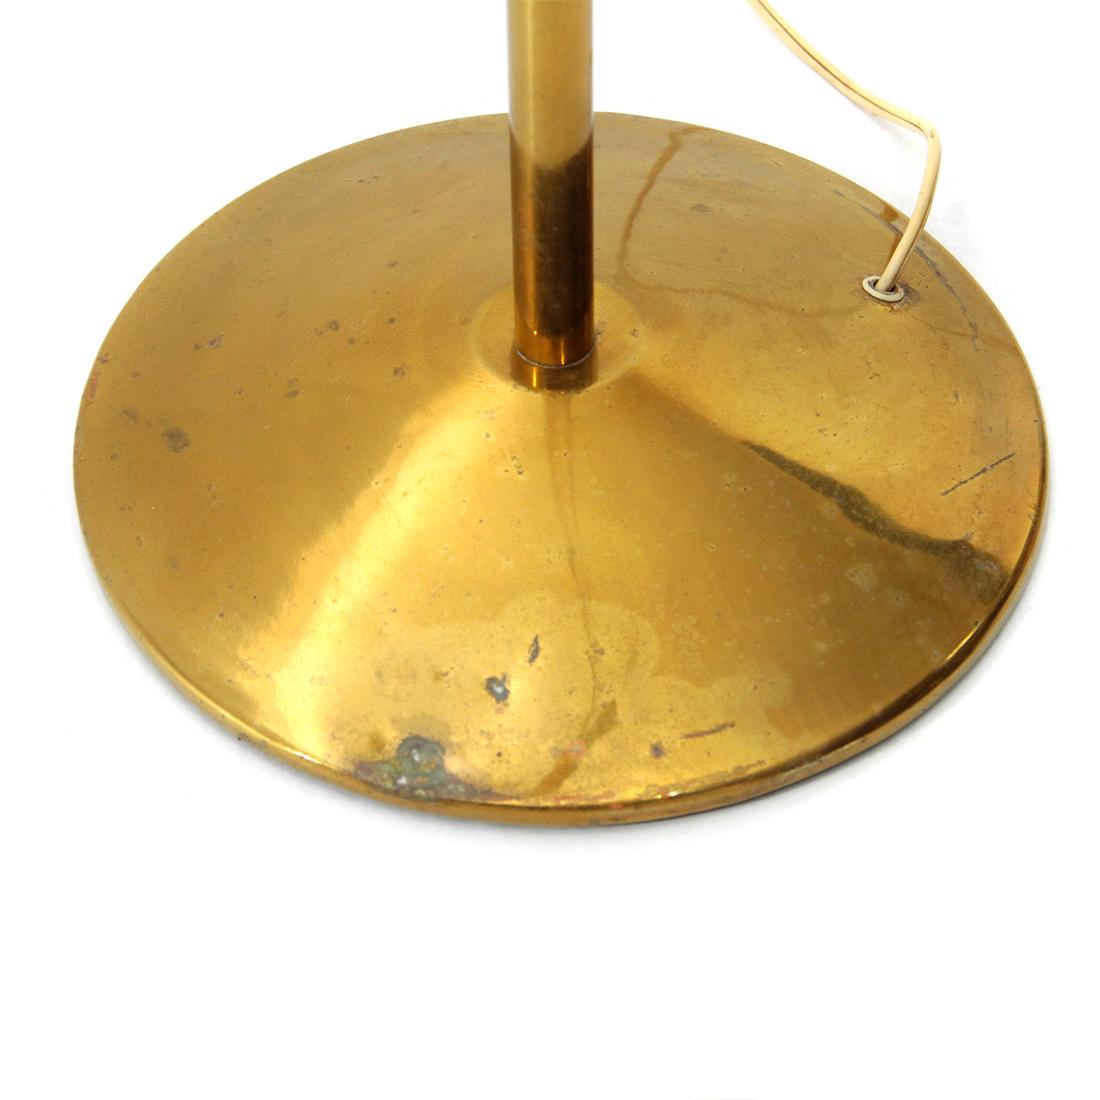 Mid-20th Century Floor Lamp in Brass and Yellow Diffuser, 1950s